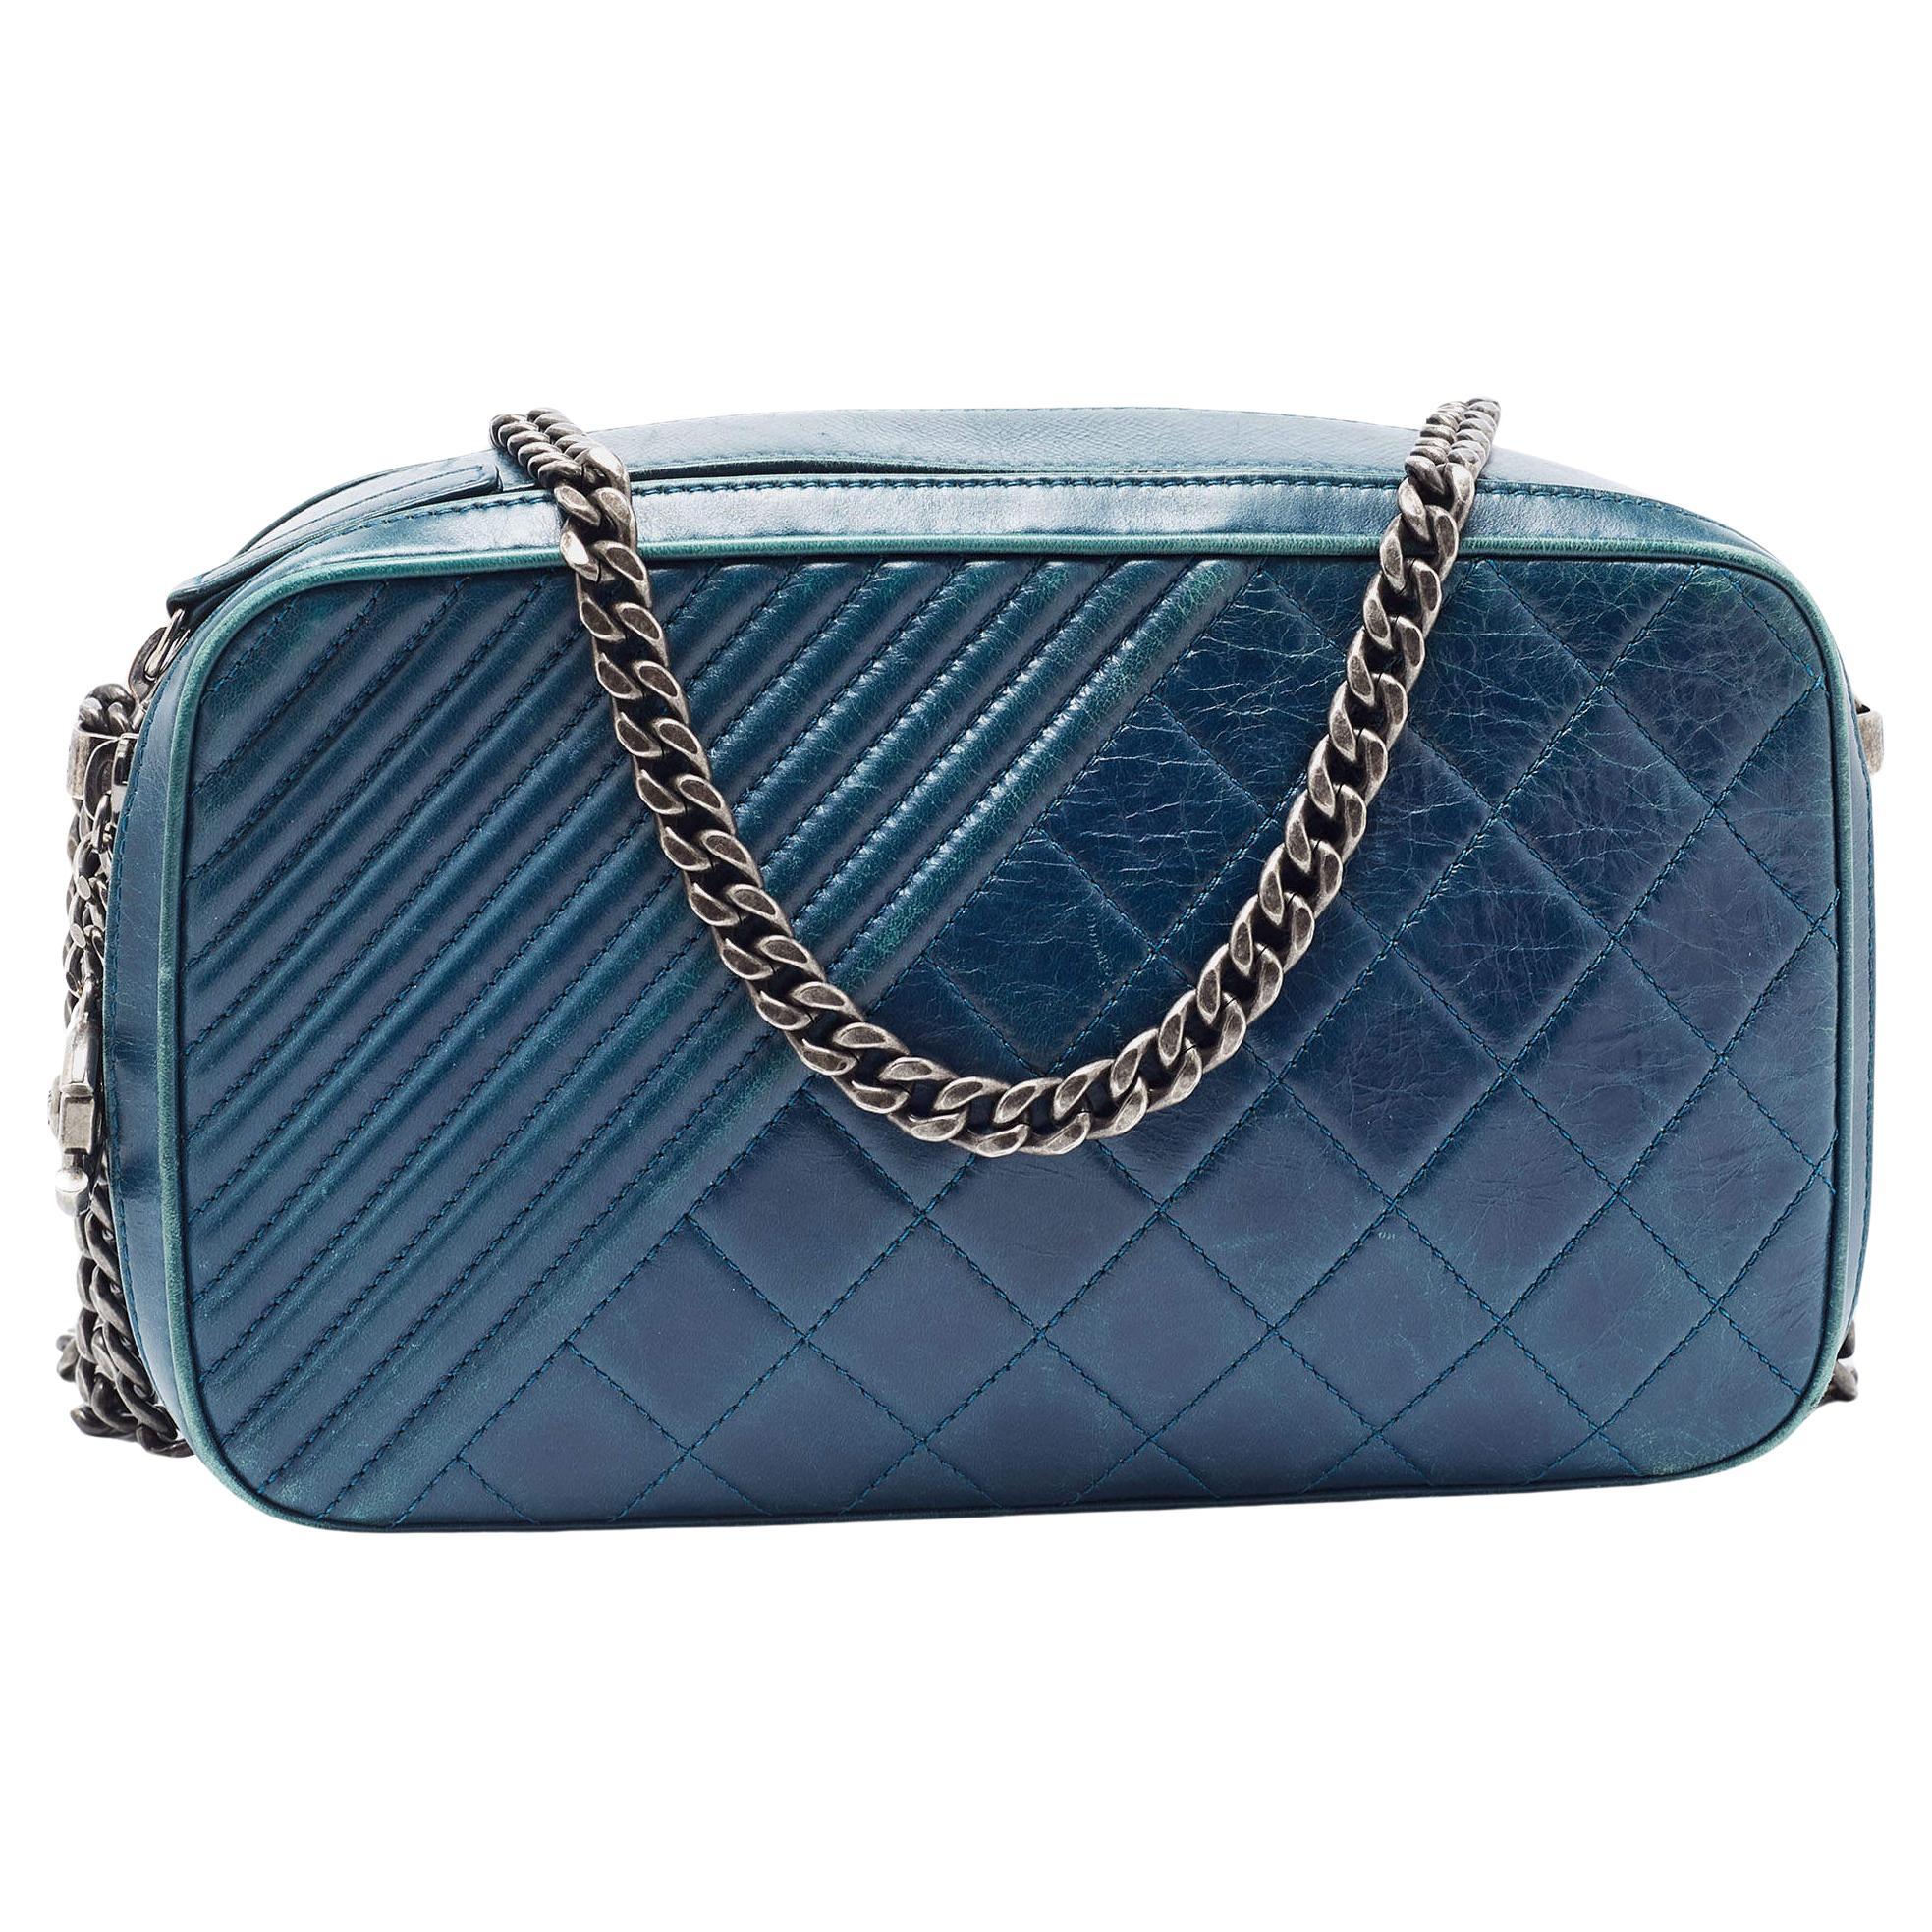 Chanel Teal Blue Quilted Leather Coco Boy Camera Case Bag For Sale